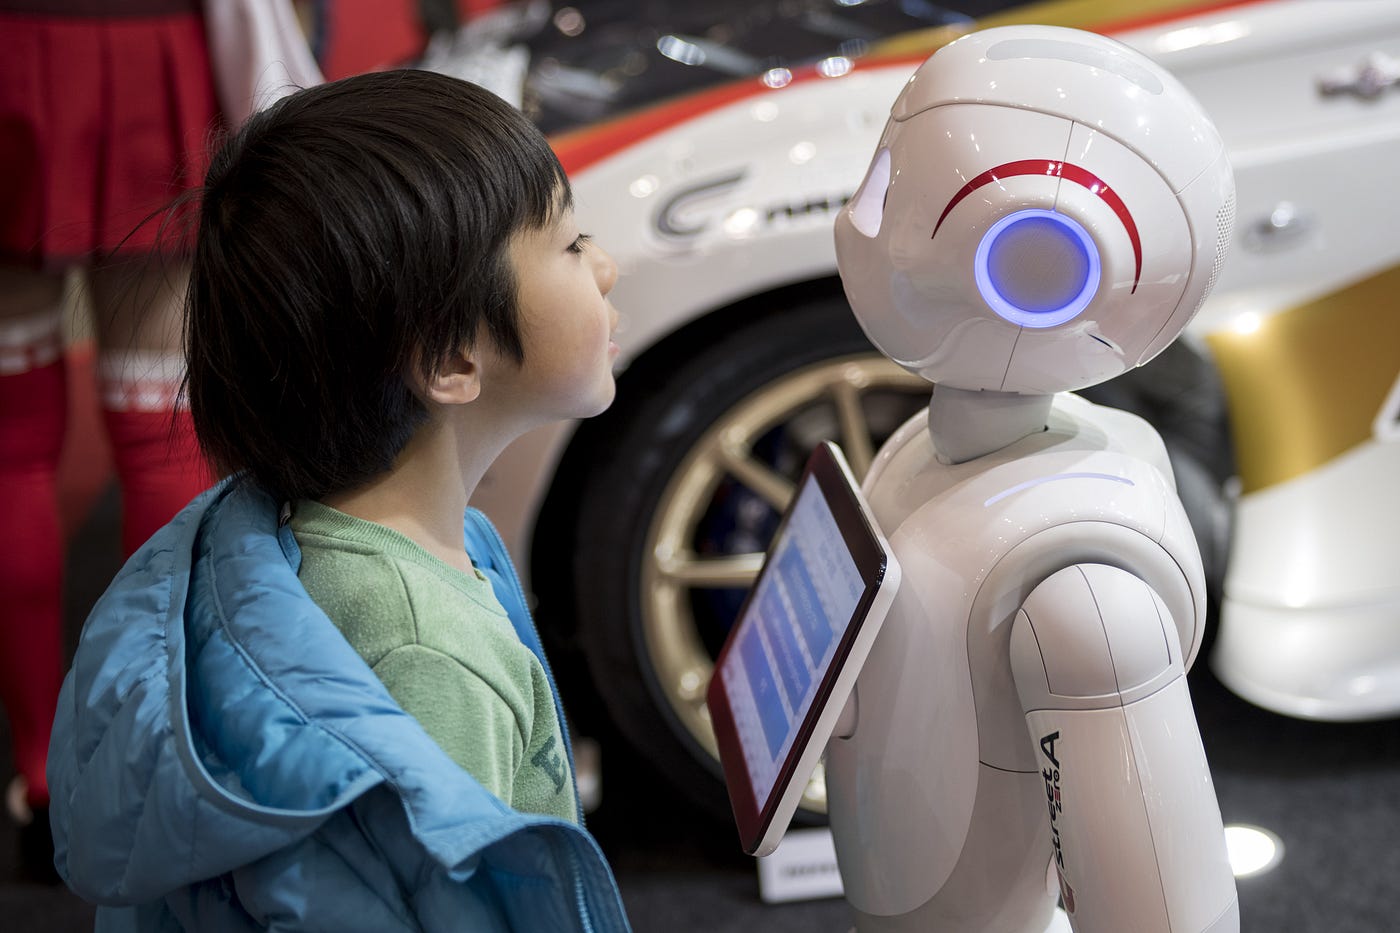 Think cellphones are bad? Just watch what robots can do to kids